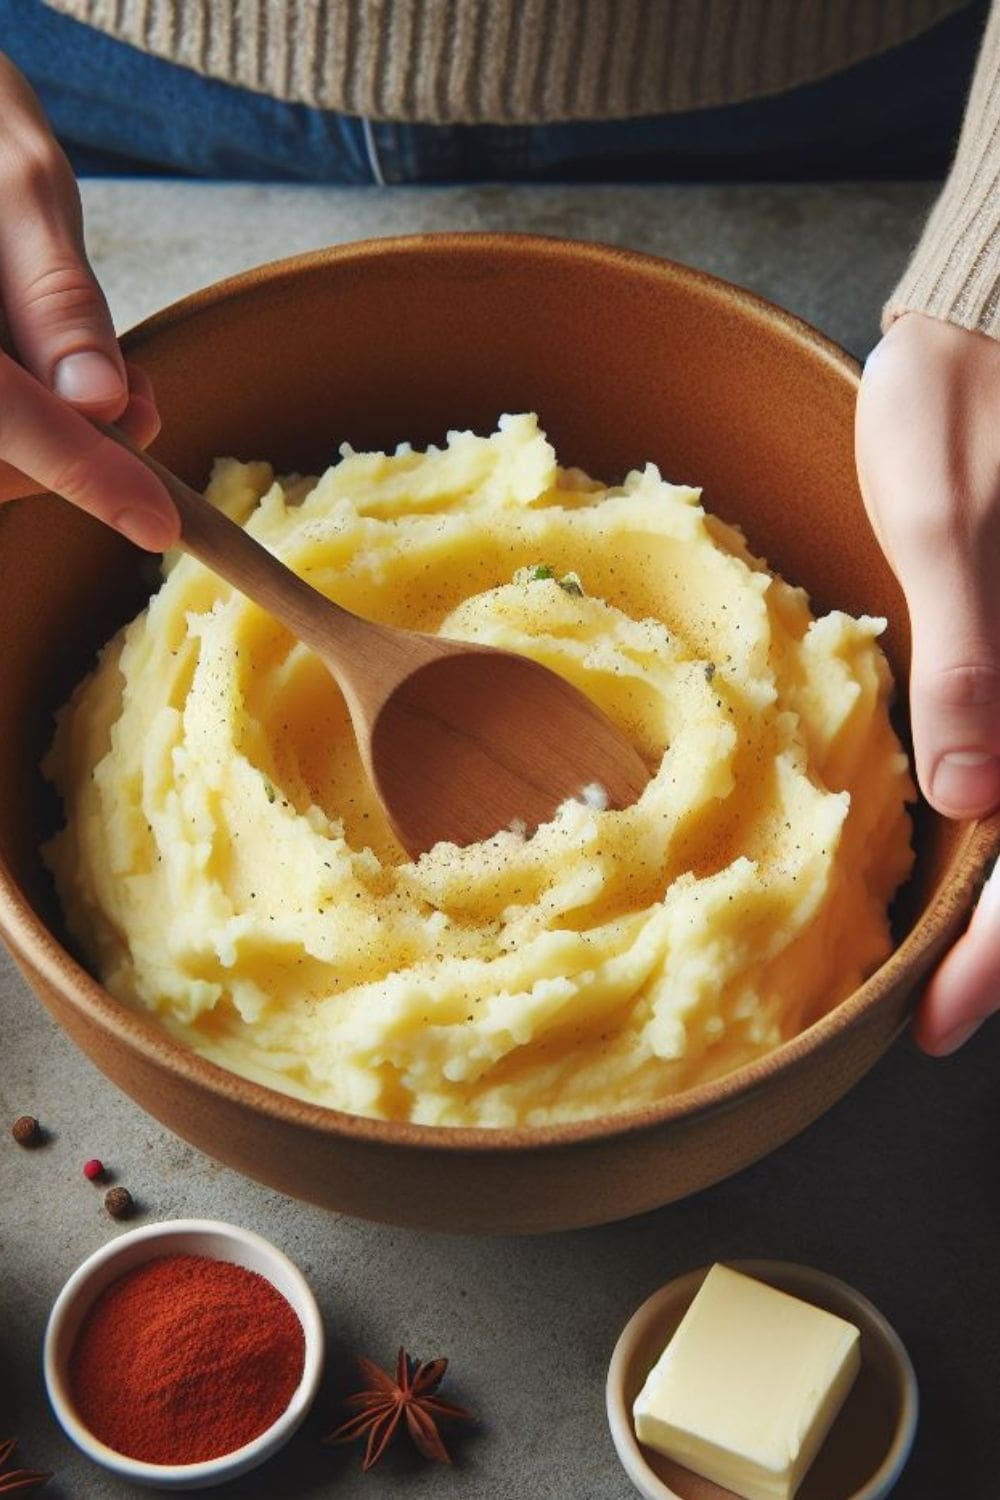 A photo of someone digging a wooden spoon into a bowl of mashed potatoes. 